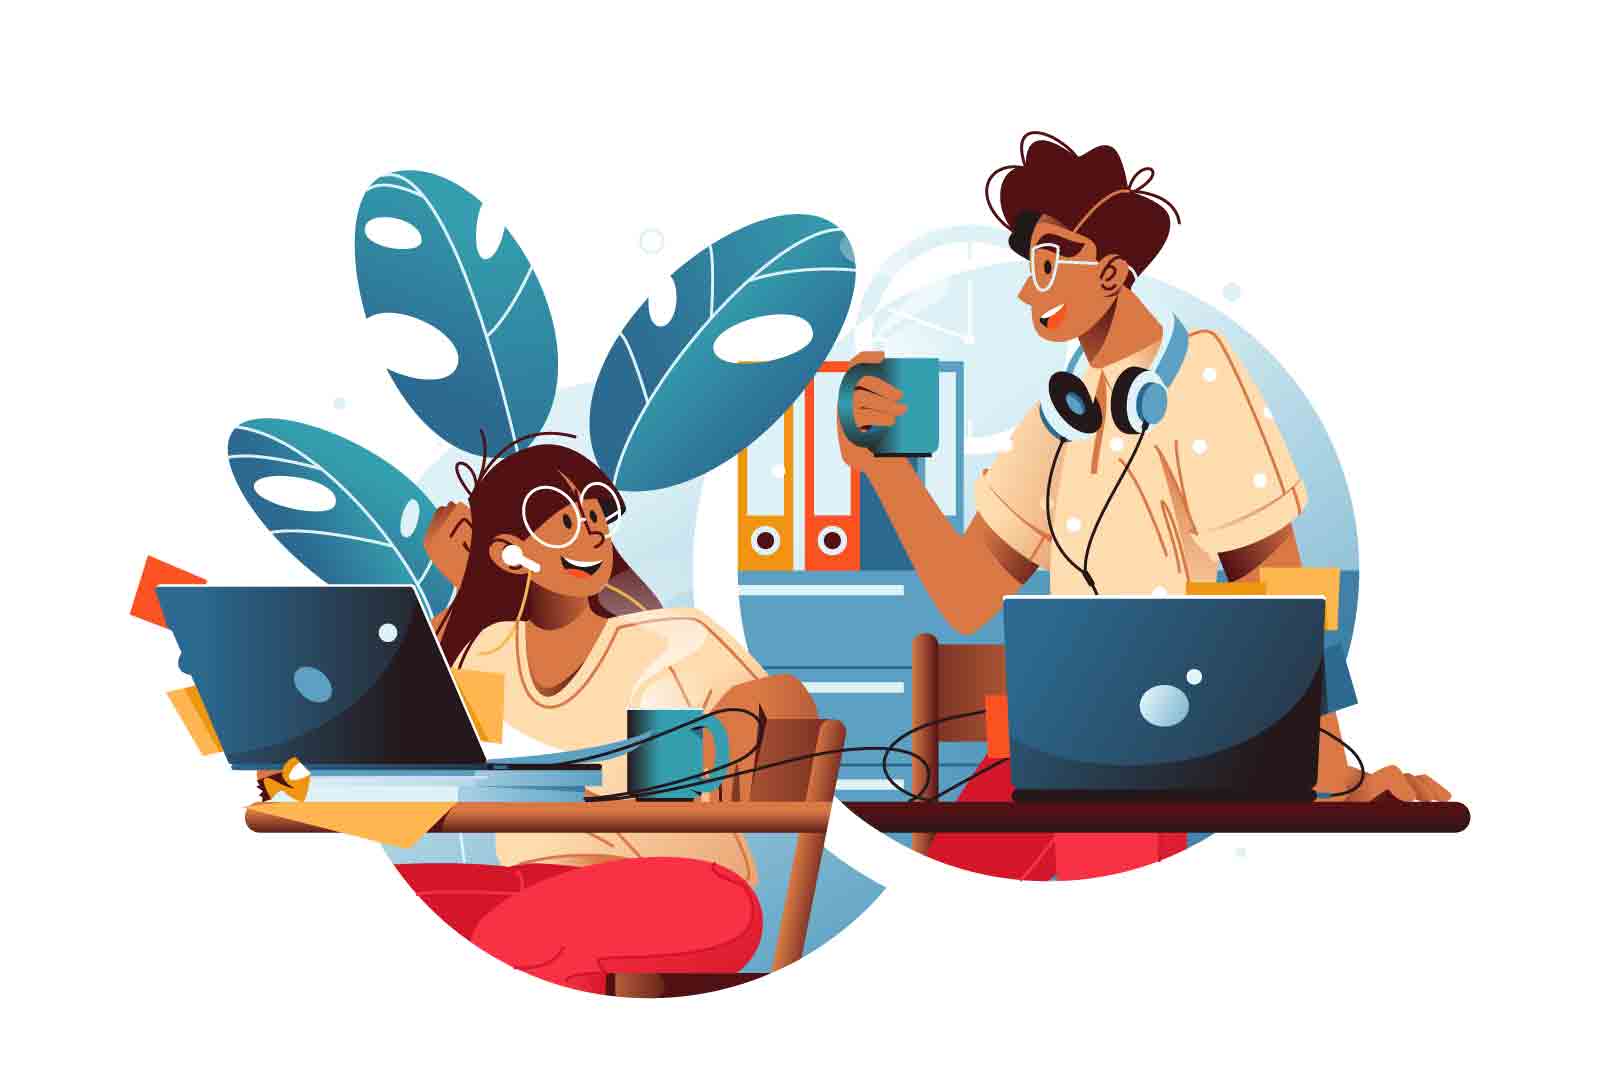 Two colleagues working together with laptops, smiling, and surrounded by office documents and plants, vector illustration.